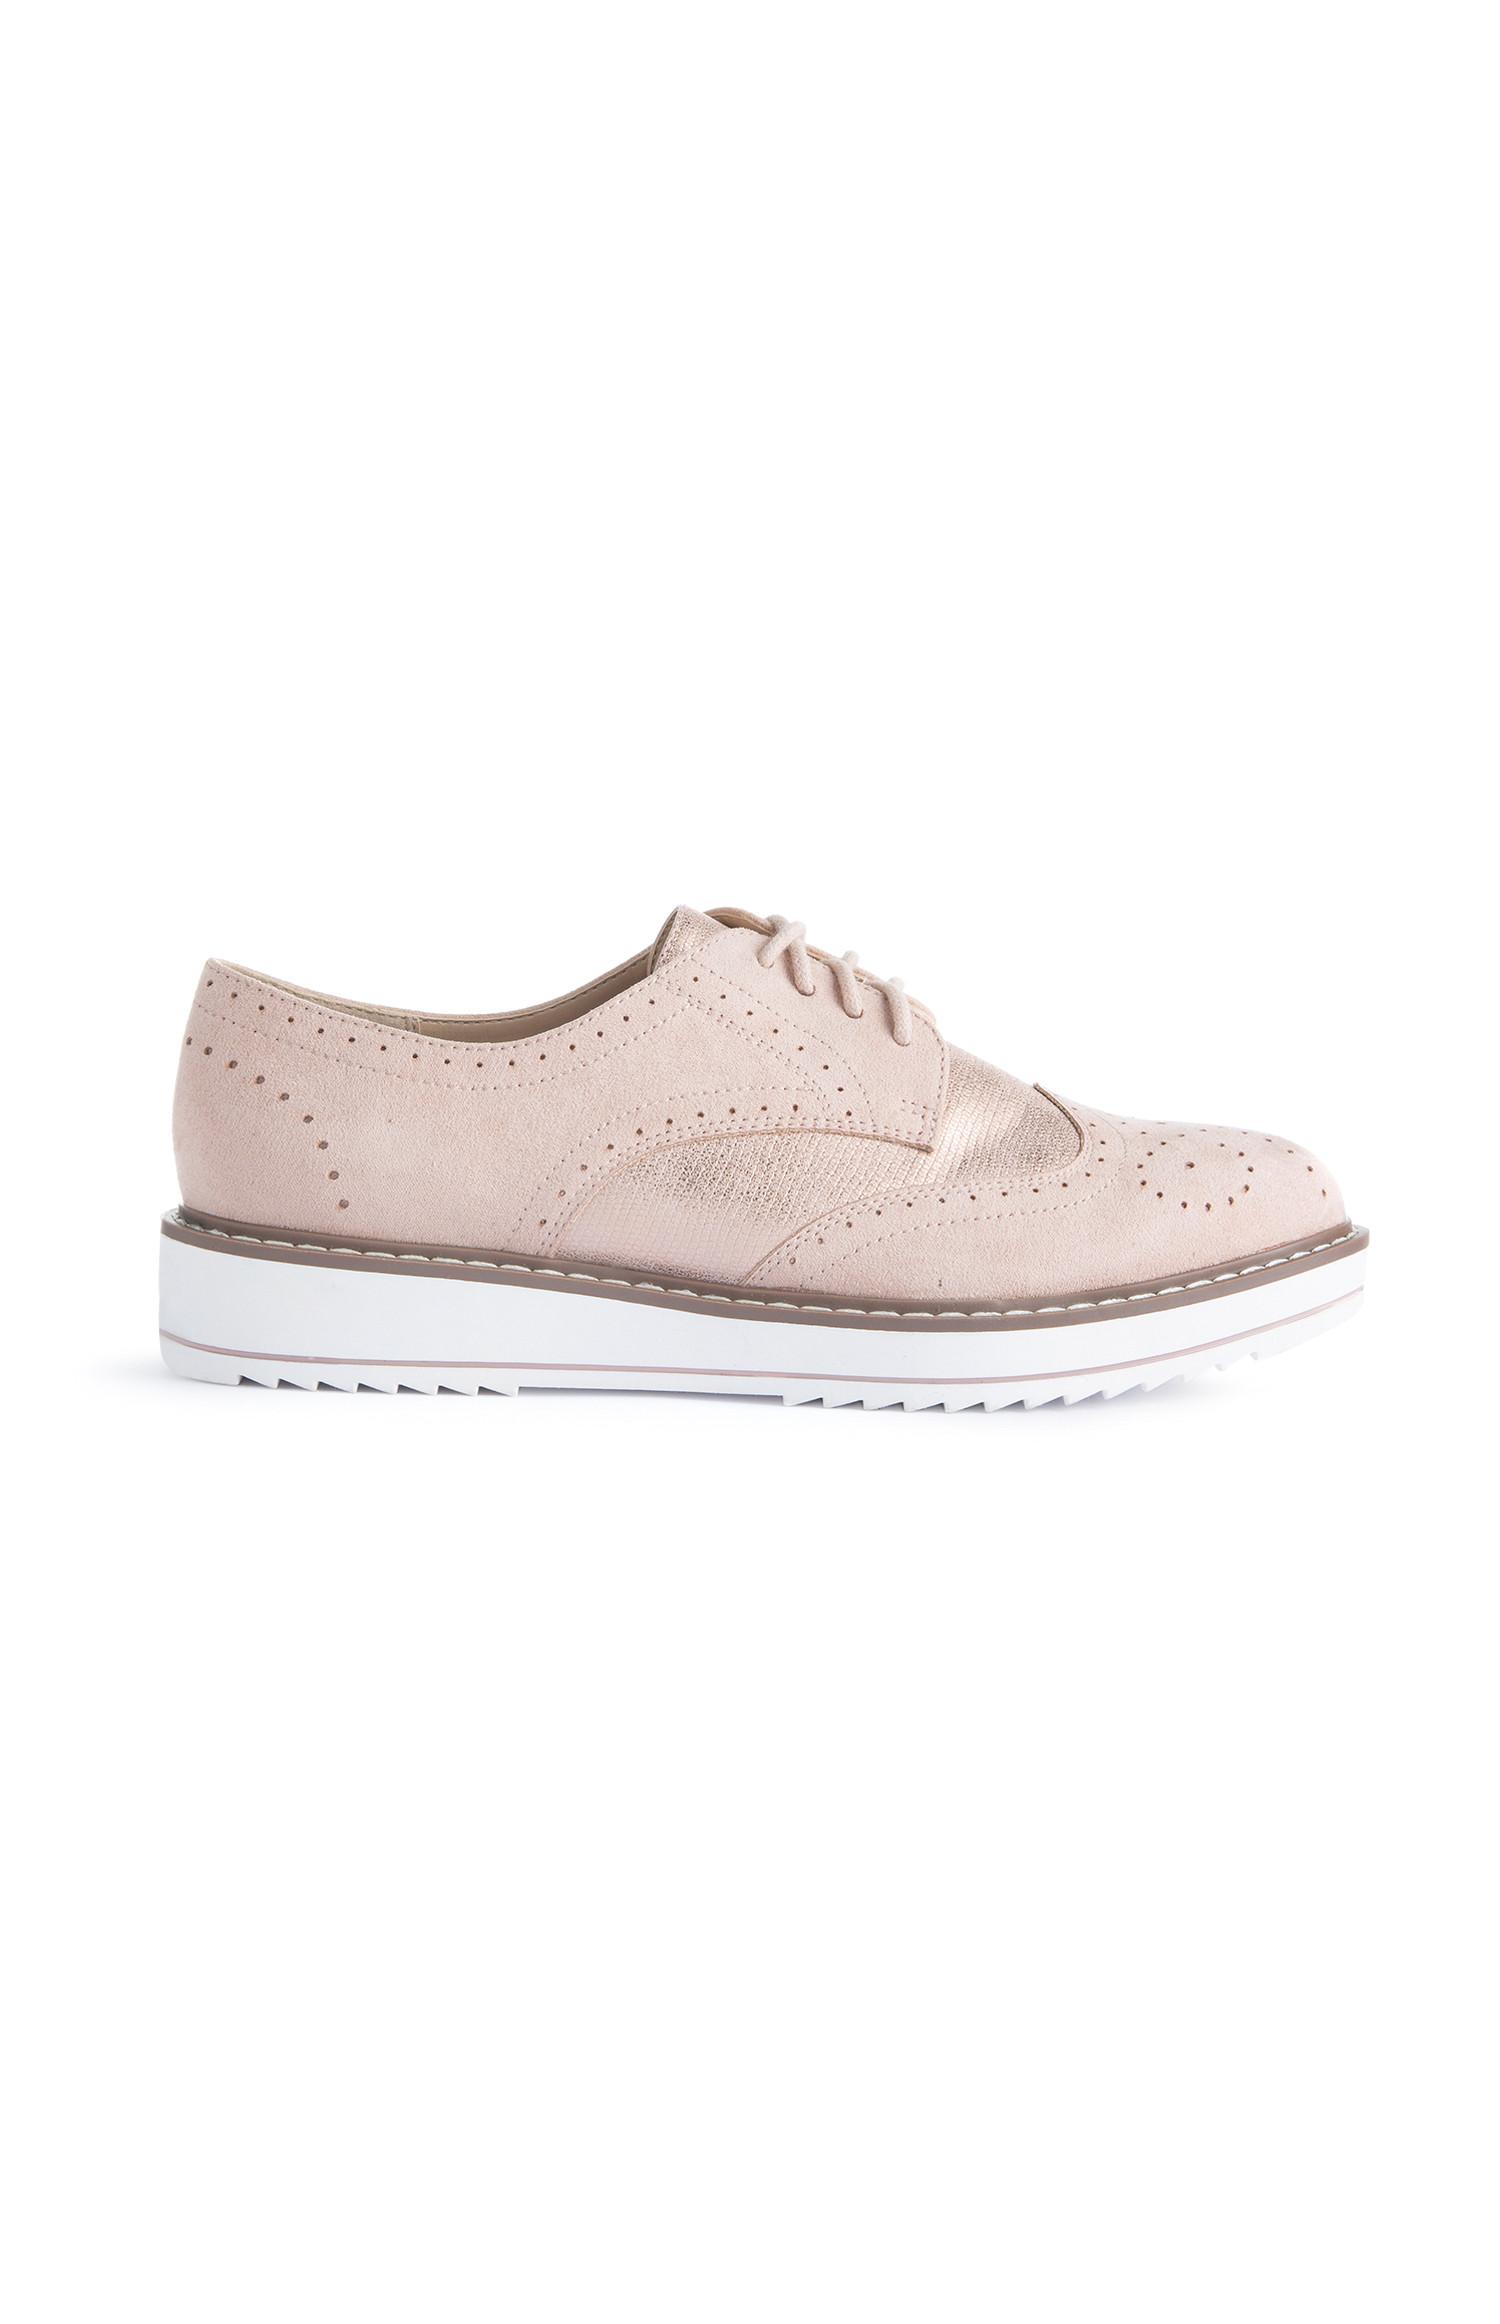 primark brogues womens shoes